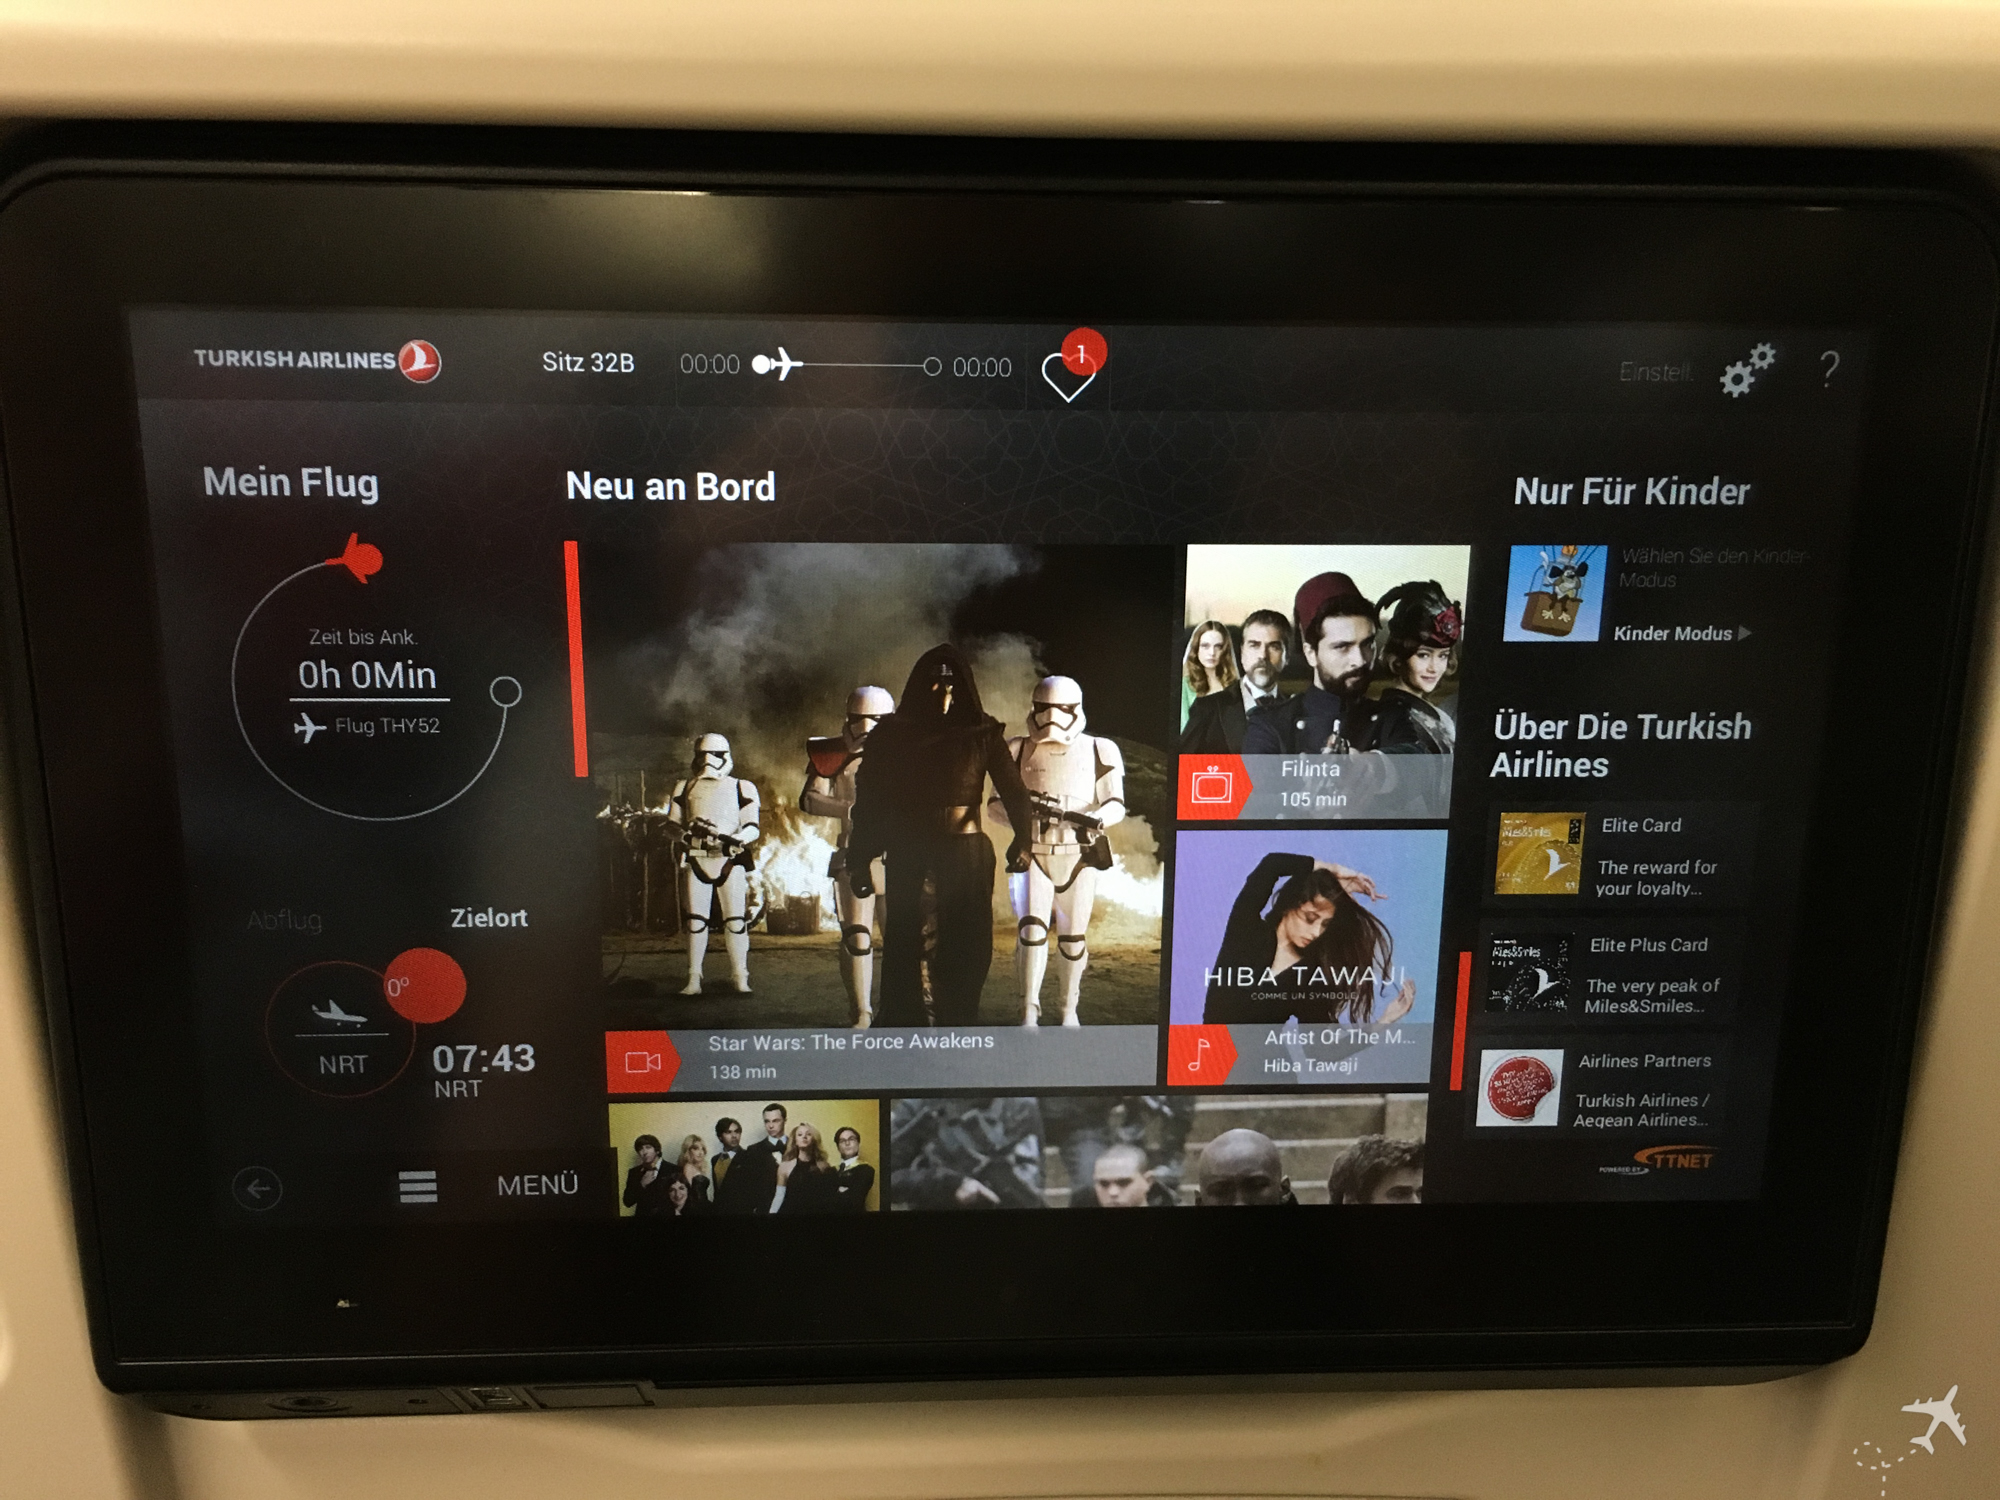 Turkish Airlines Economy Class Inflight Entertainment System